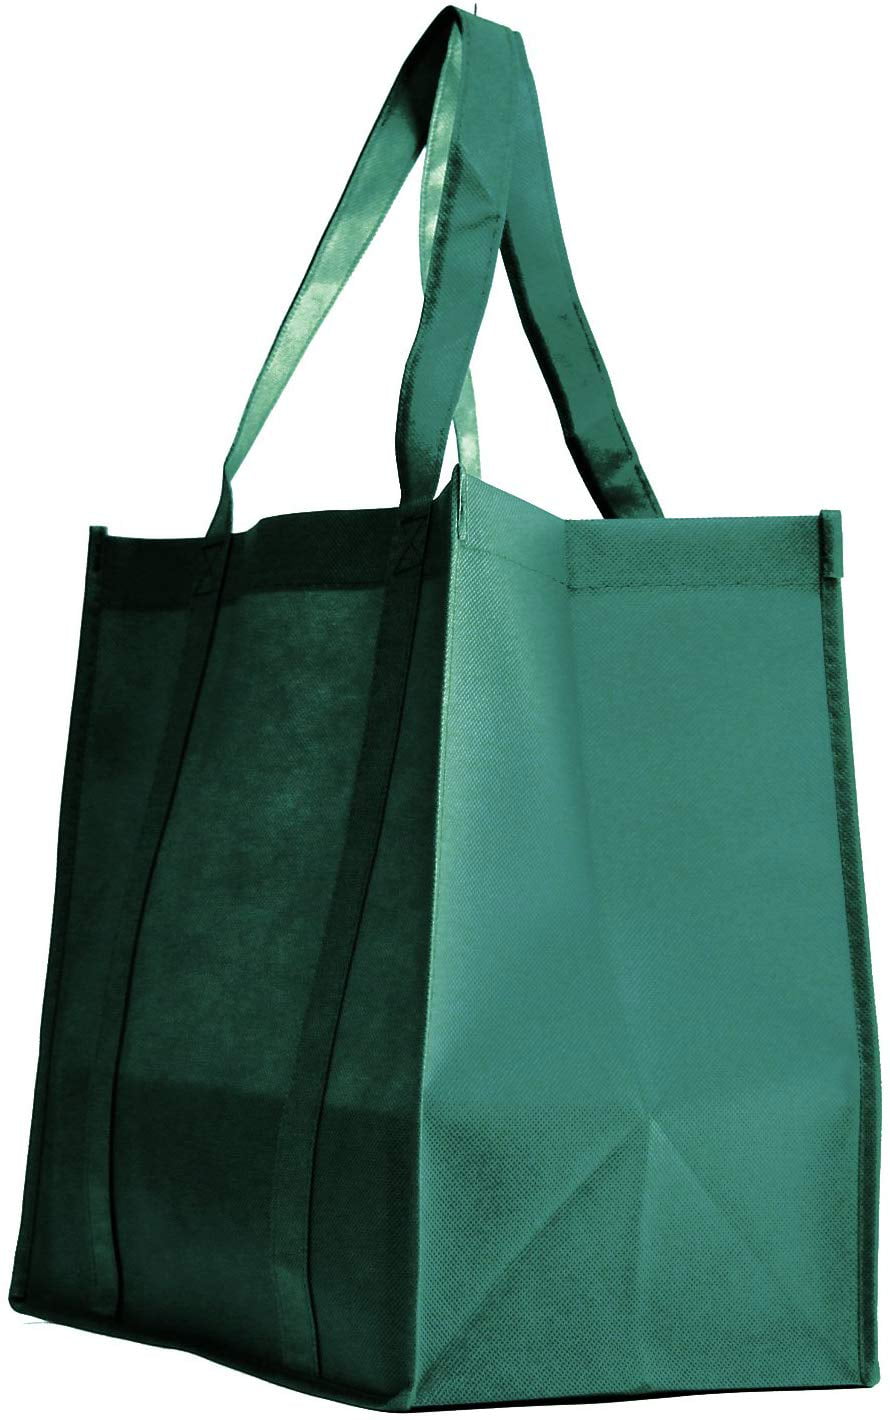 Hot Reusable Shopping Bags Non Woven Grab Eco Friendly Tote Grocery Storage Bag 